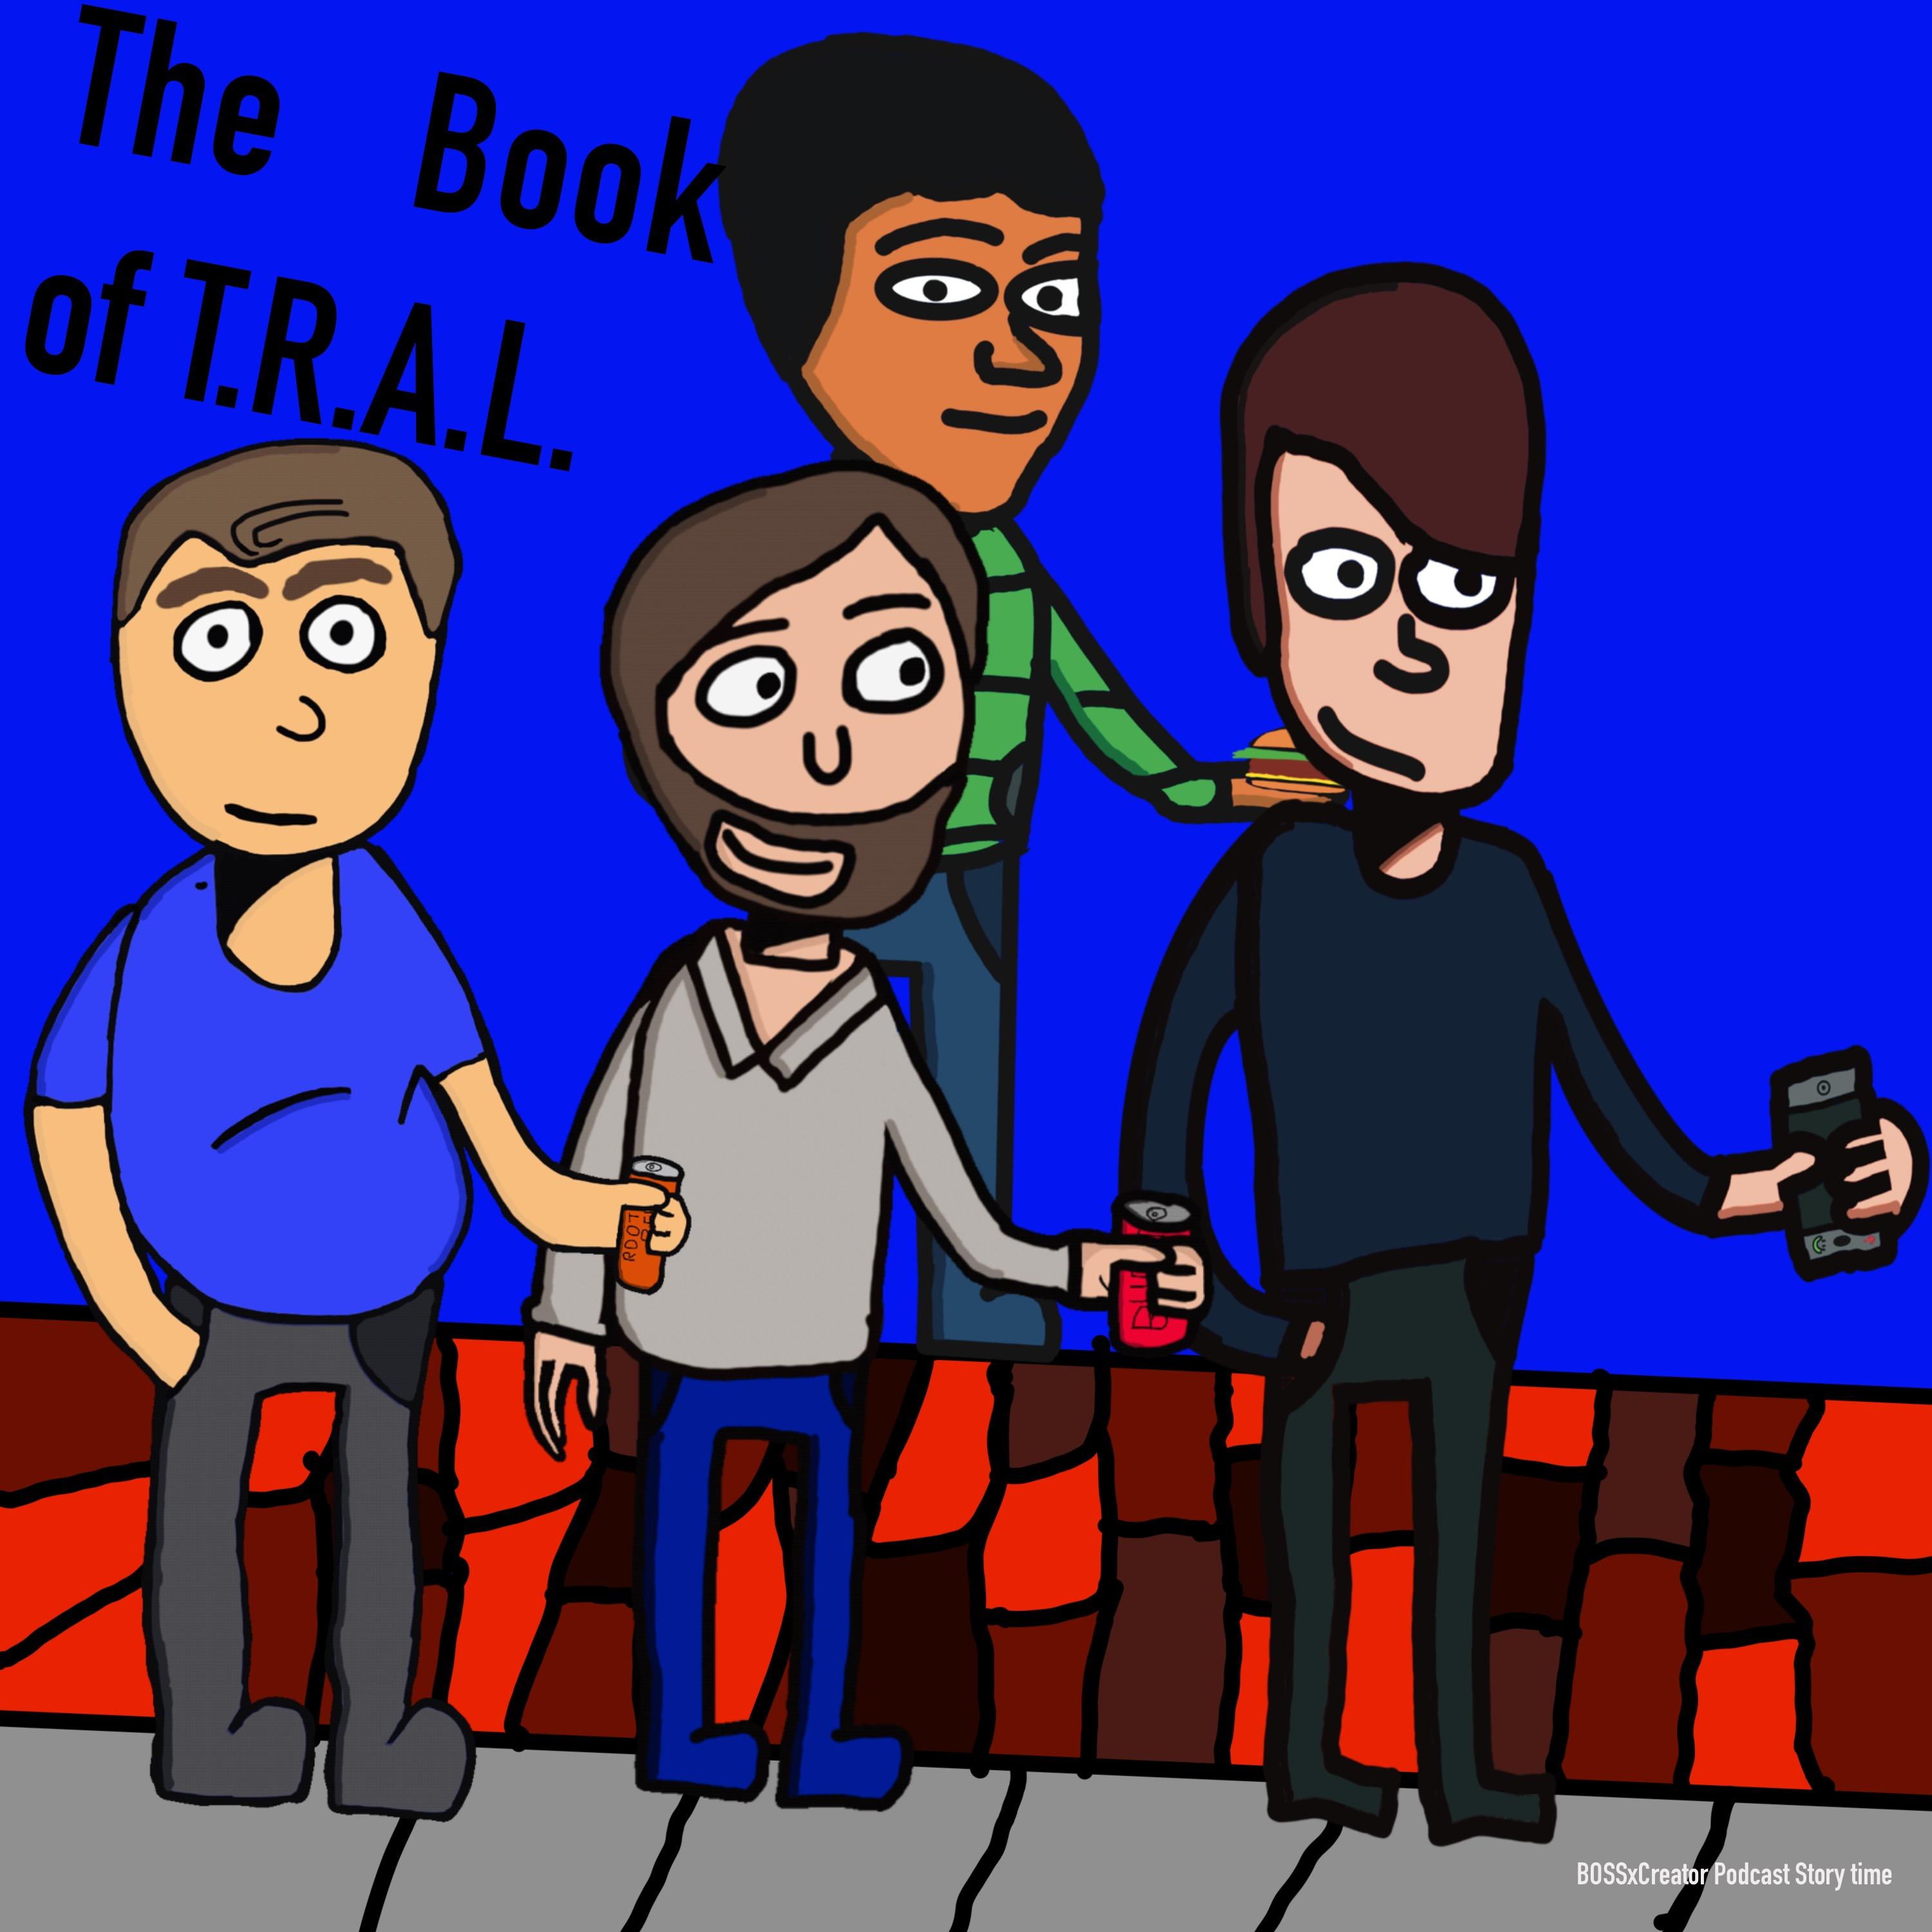 The Book of T.R.A.L. by BOSSxCreator